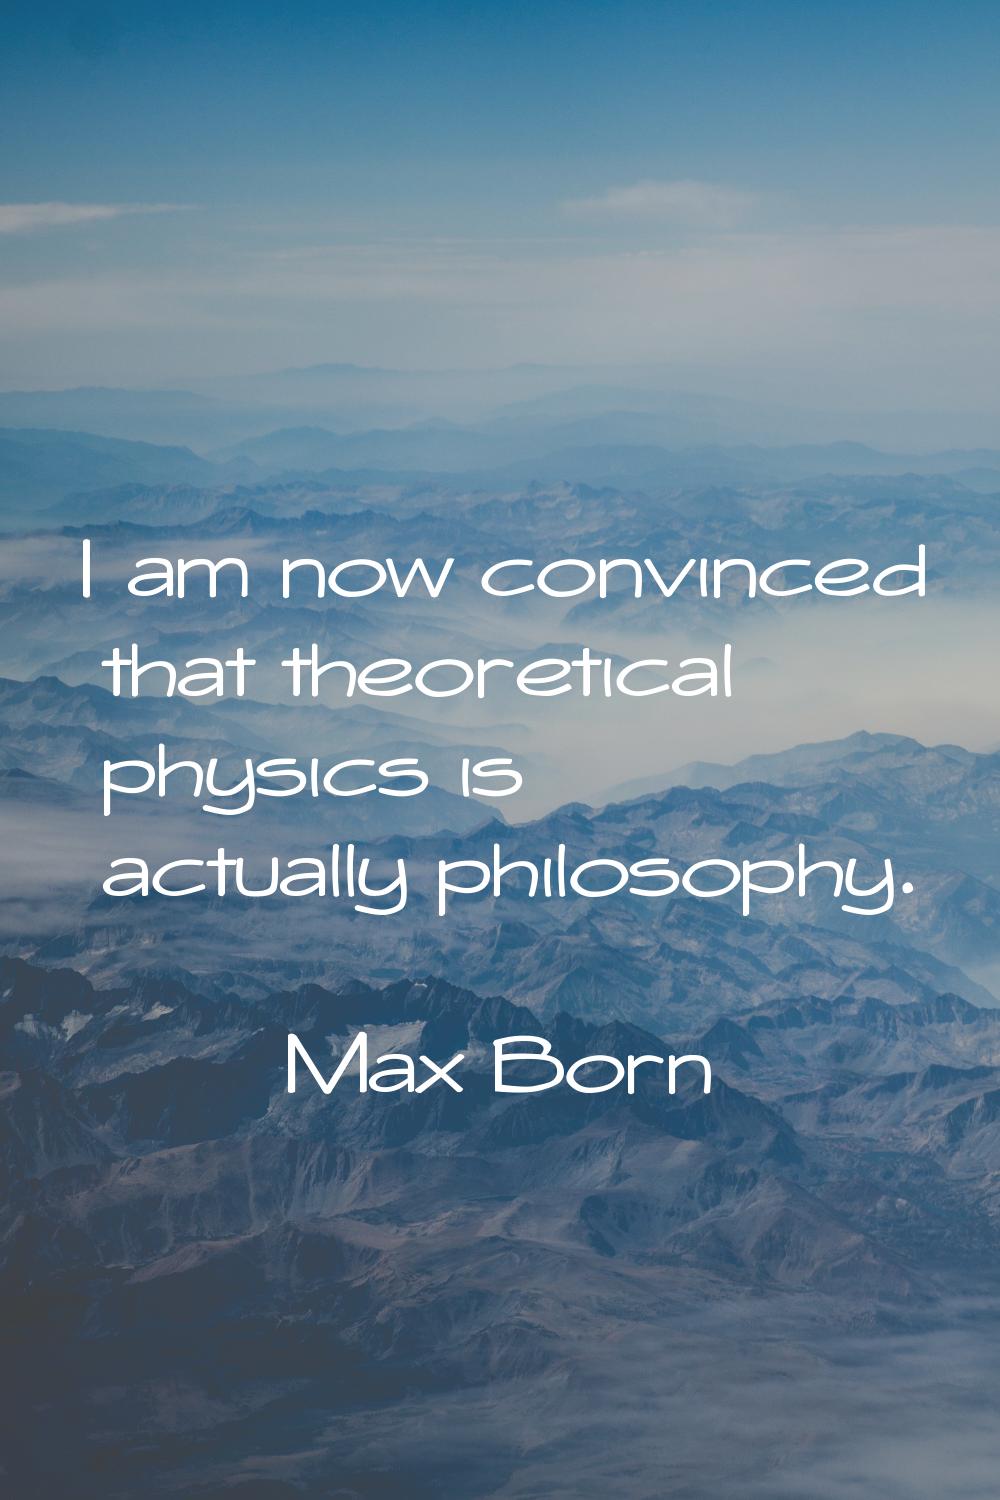 I am now convinced that theoretical physics is actually philosophy.